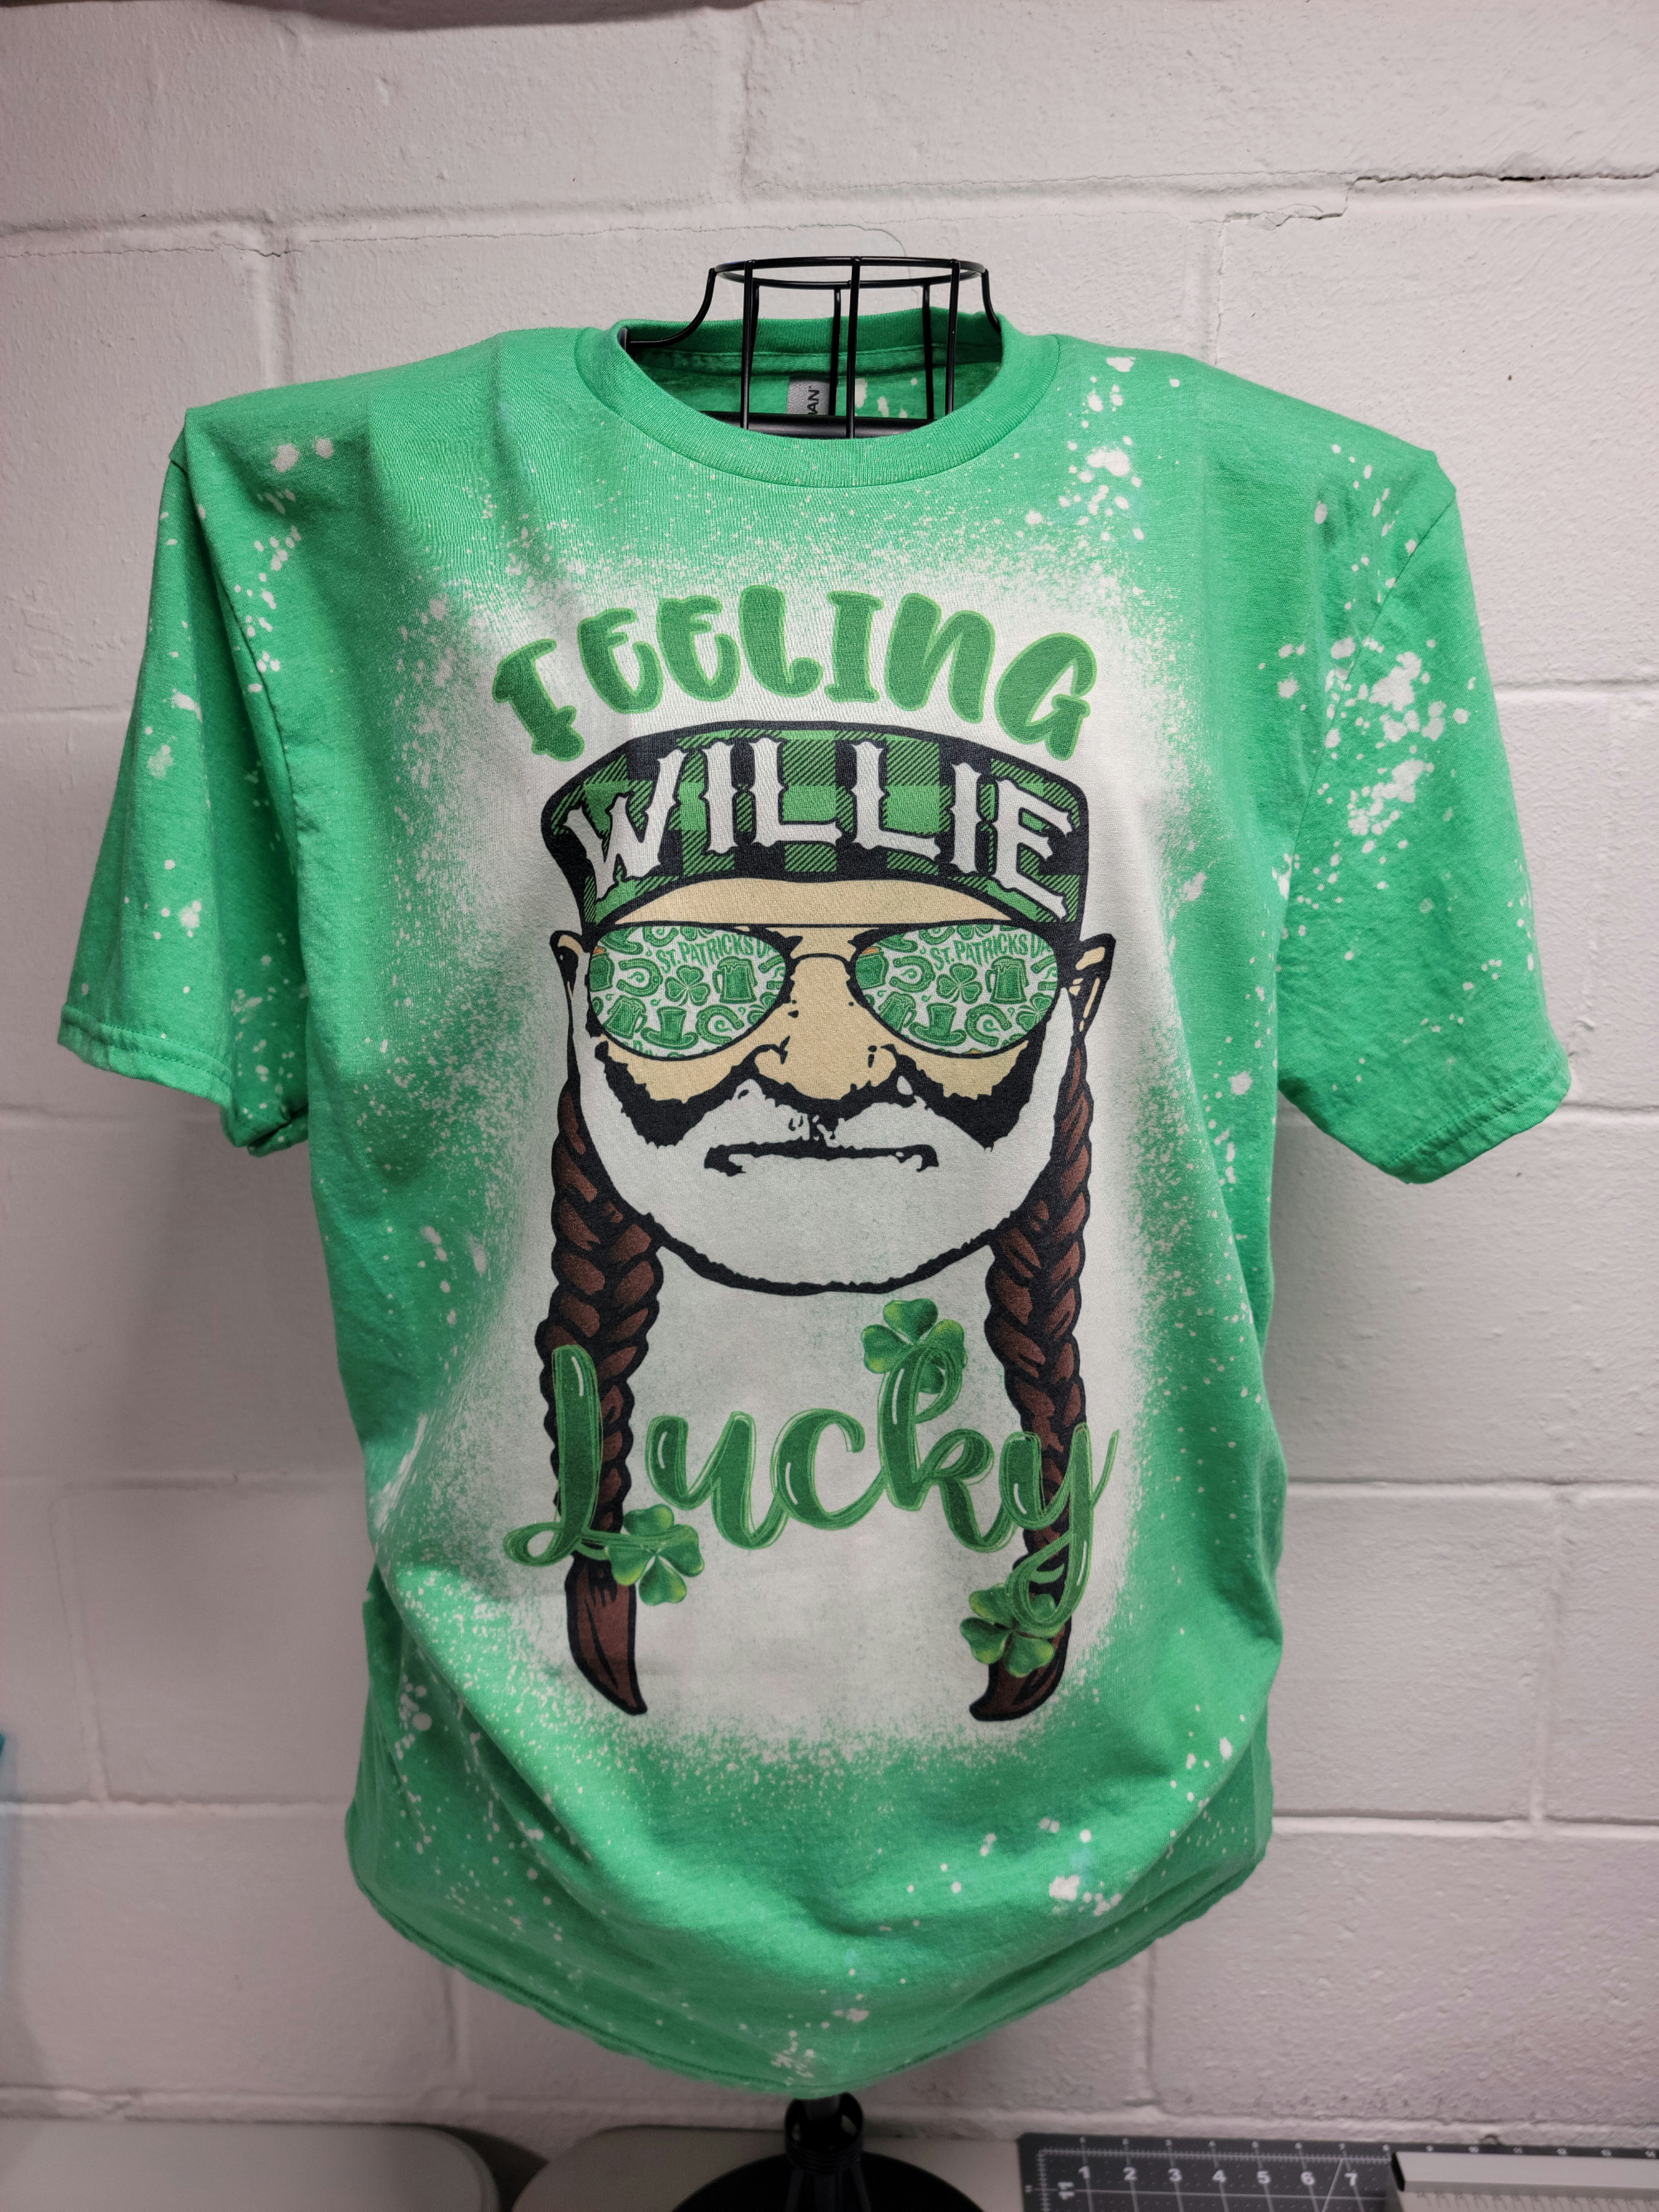 sublimation shirts Feeling Willie Lucky St Patricks day shirt bleached shirt